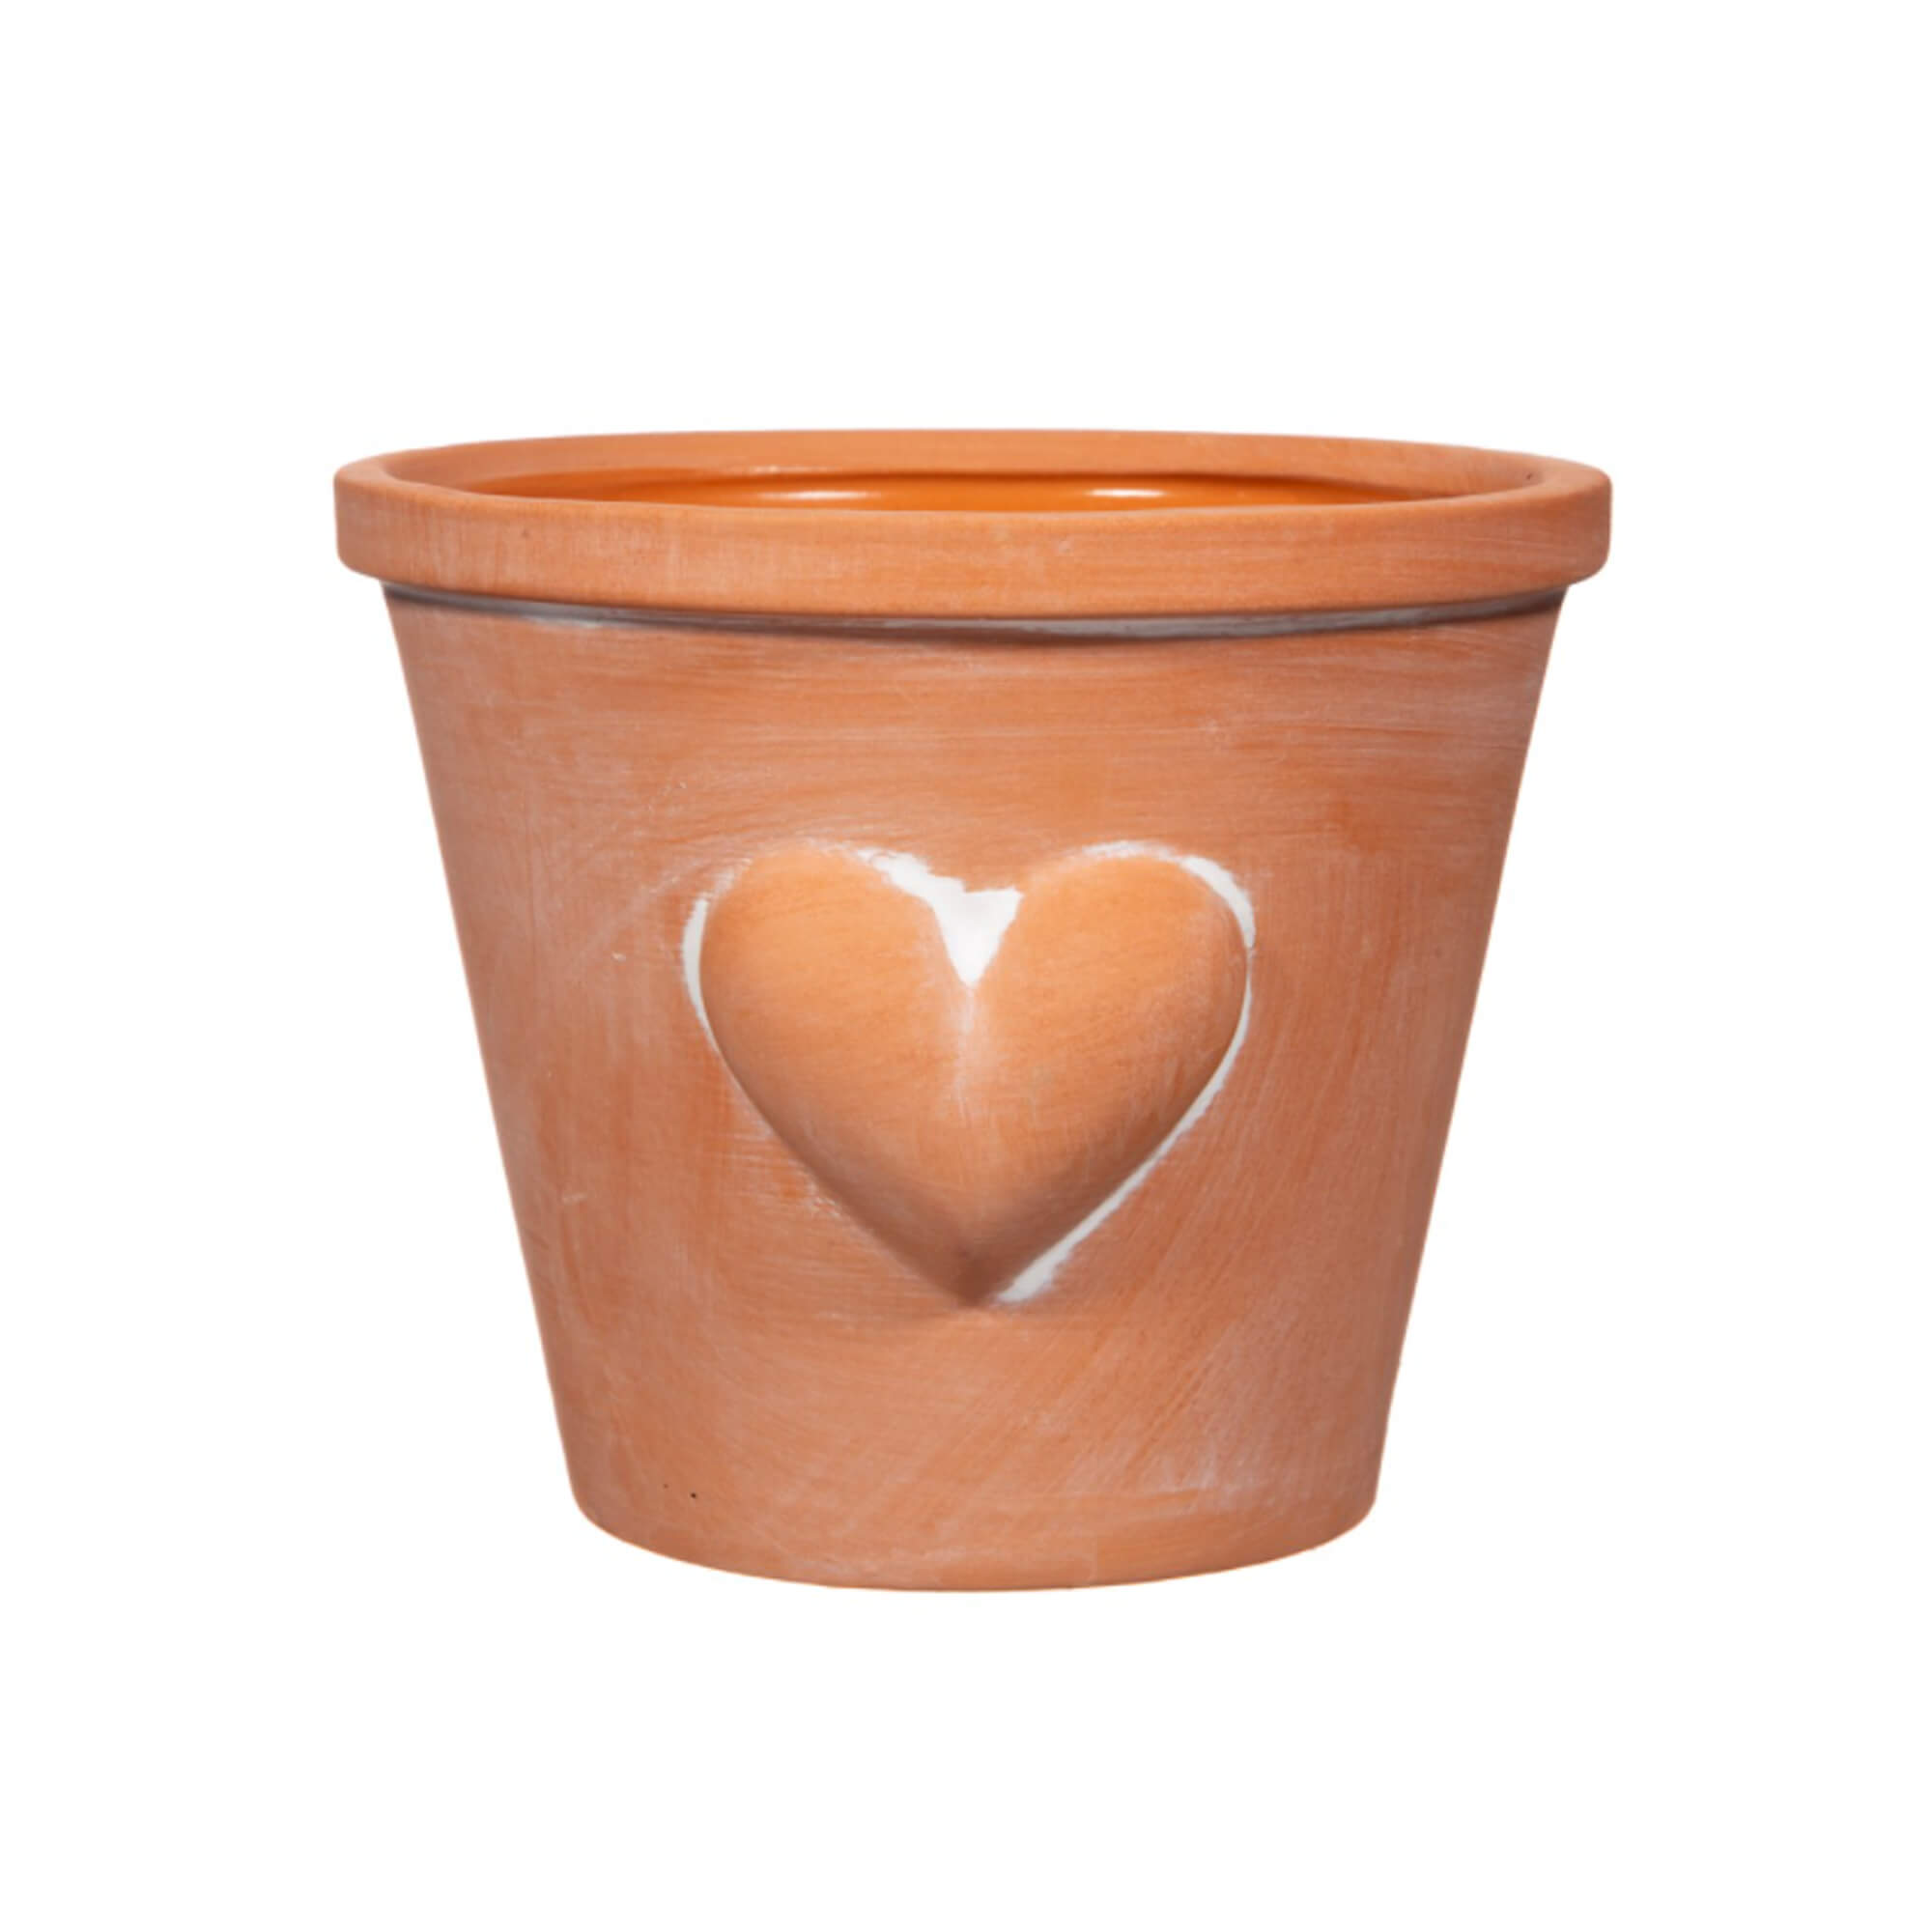 Large Terracotta Heart Planter with Heart